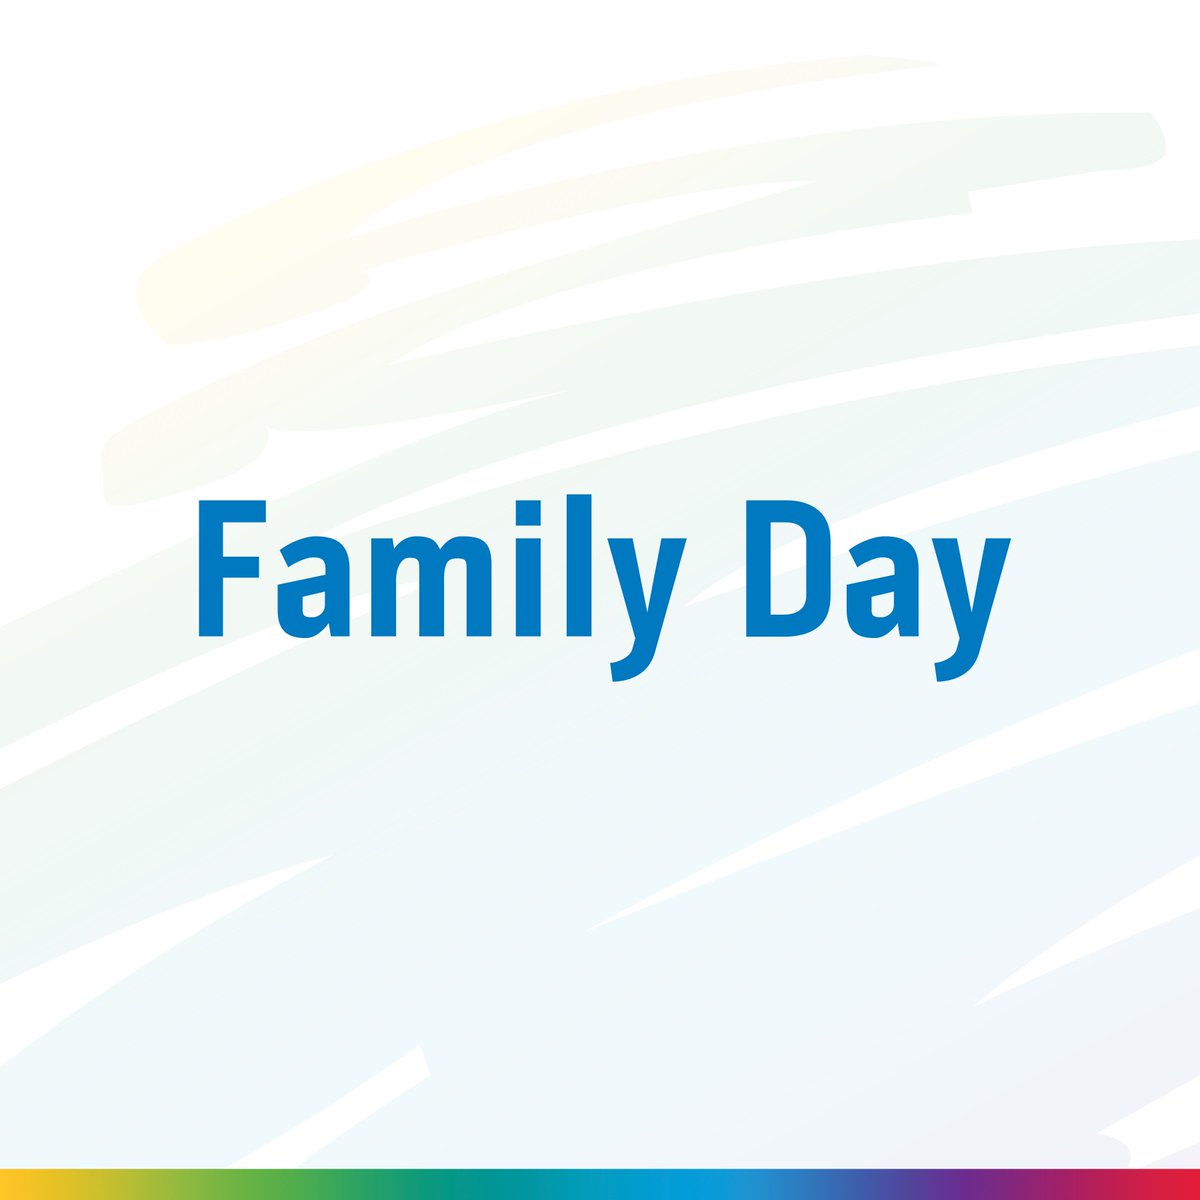 Happy Family Day! We hope today is filled with happiness and joy with the ones you love!